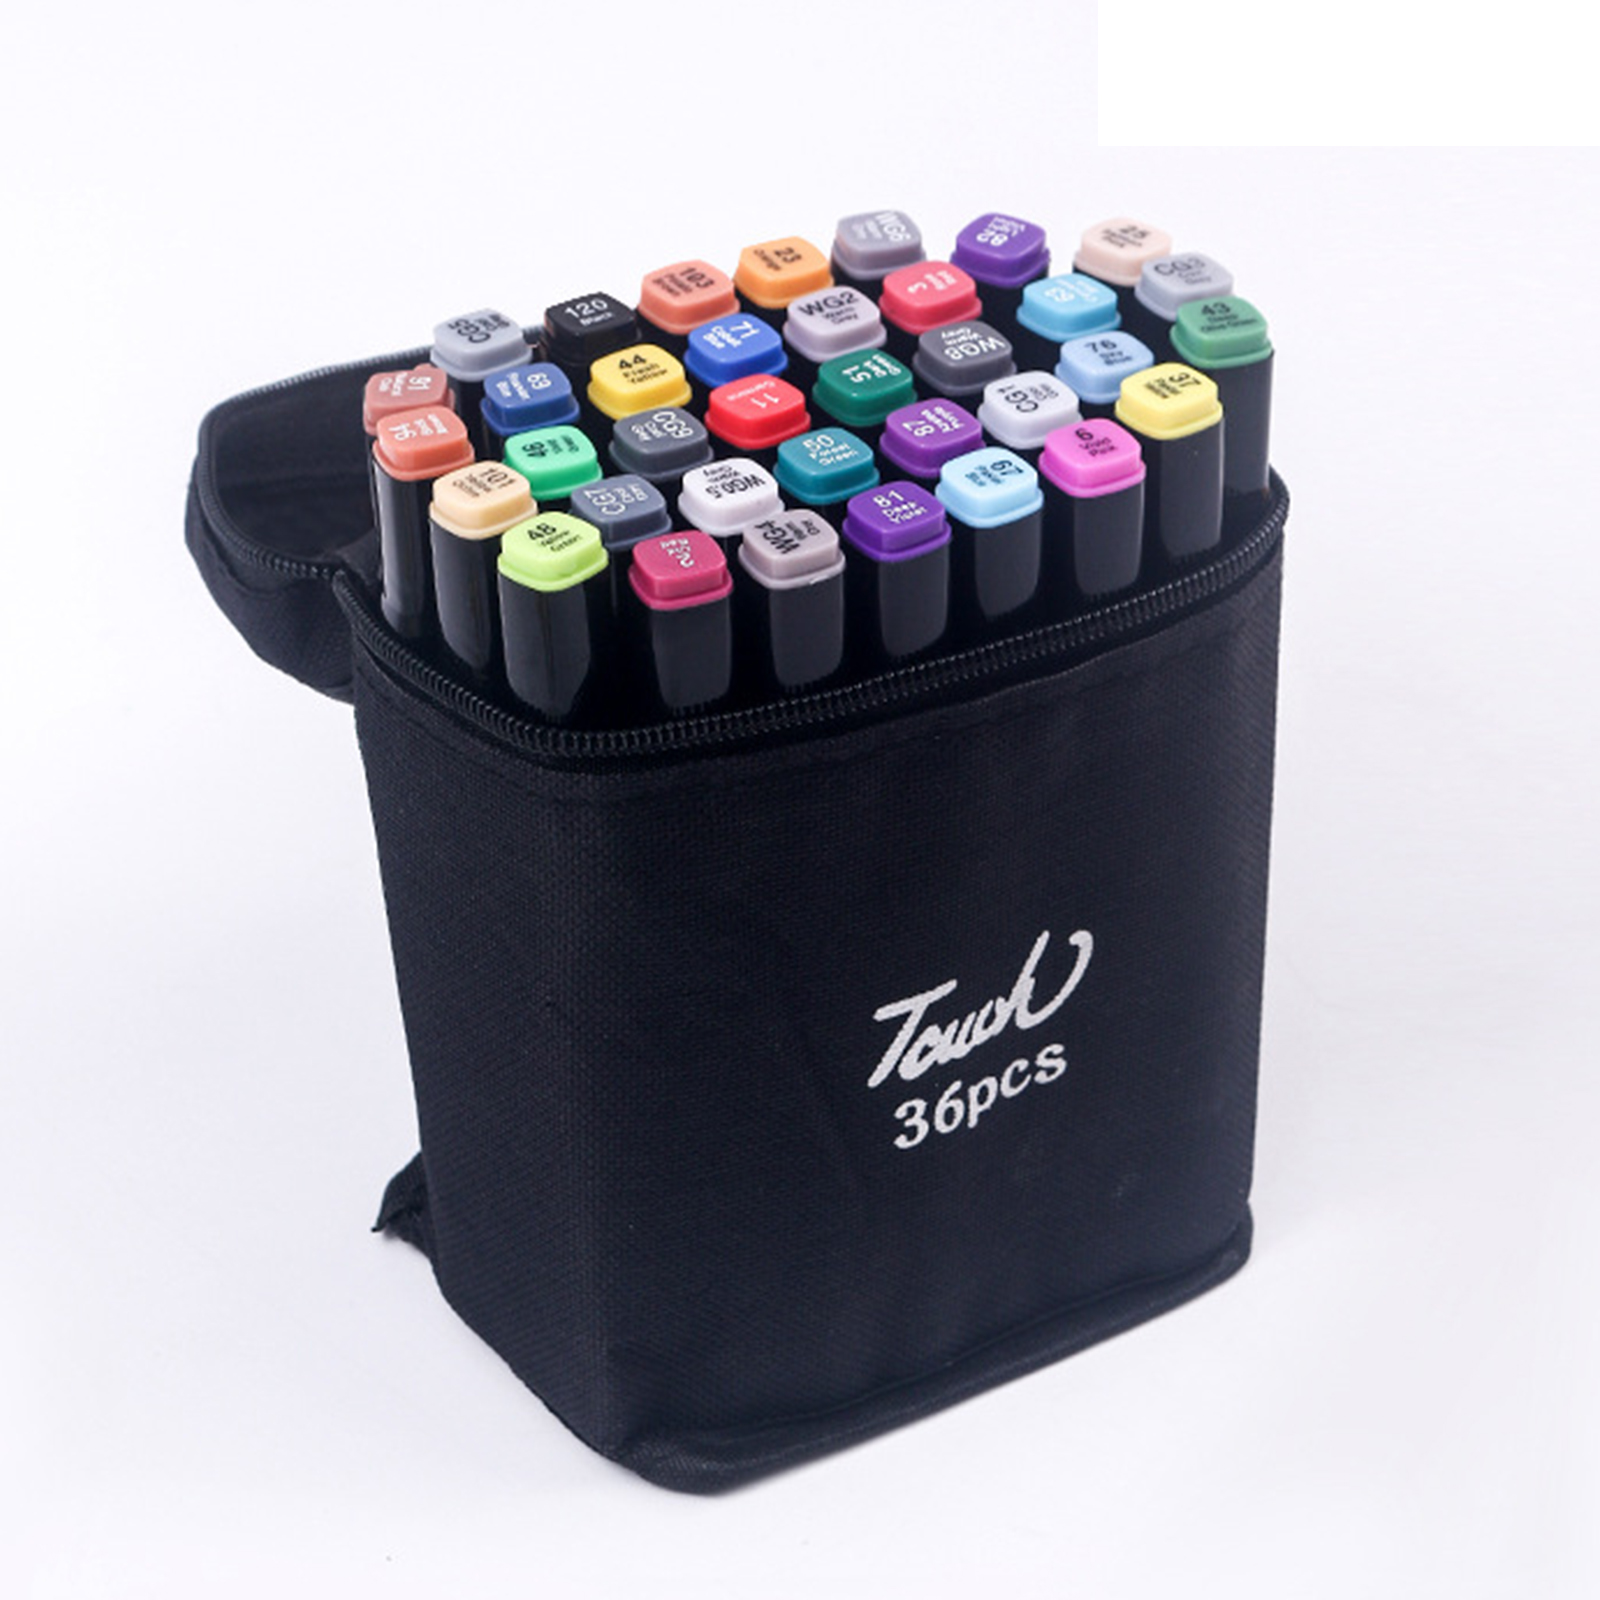 Cylindrical POSCA Marker Case, 16 Markers - Turquoise - Live in Colors